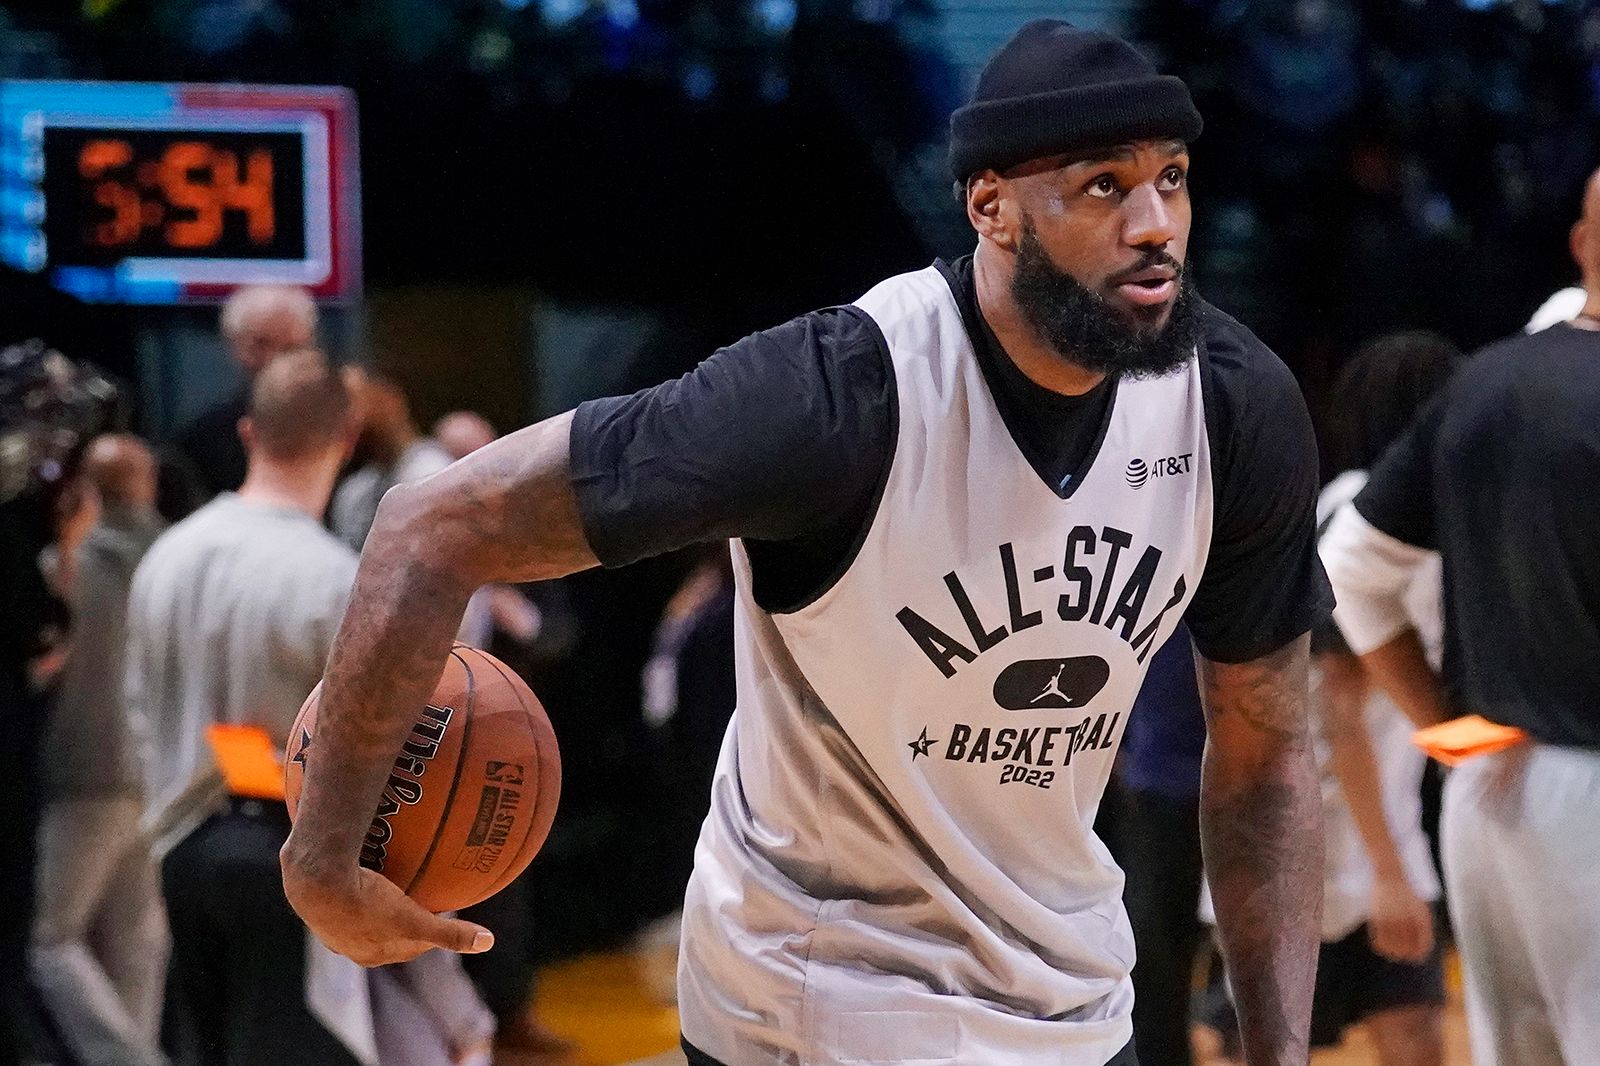 NBA All-Star Game 2022: Who are the stars on Team LeBron and Team